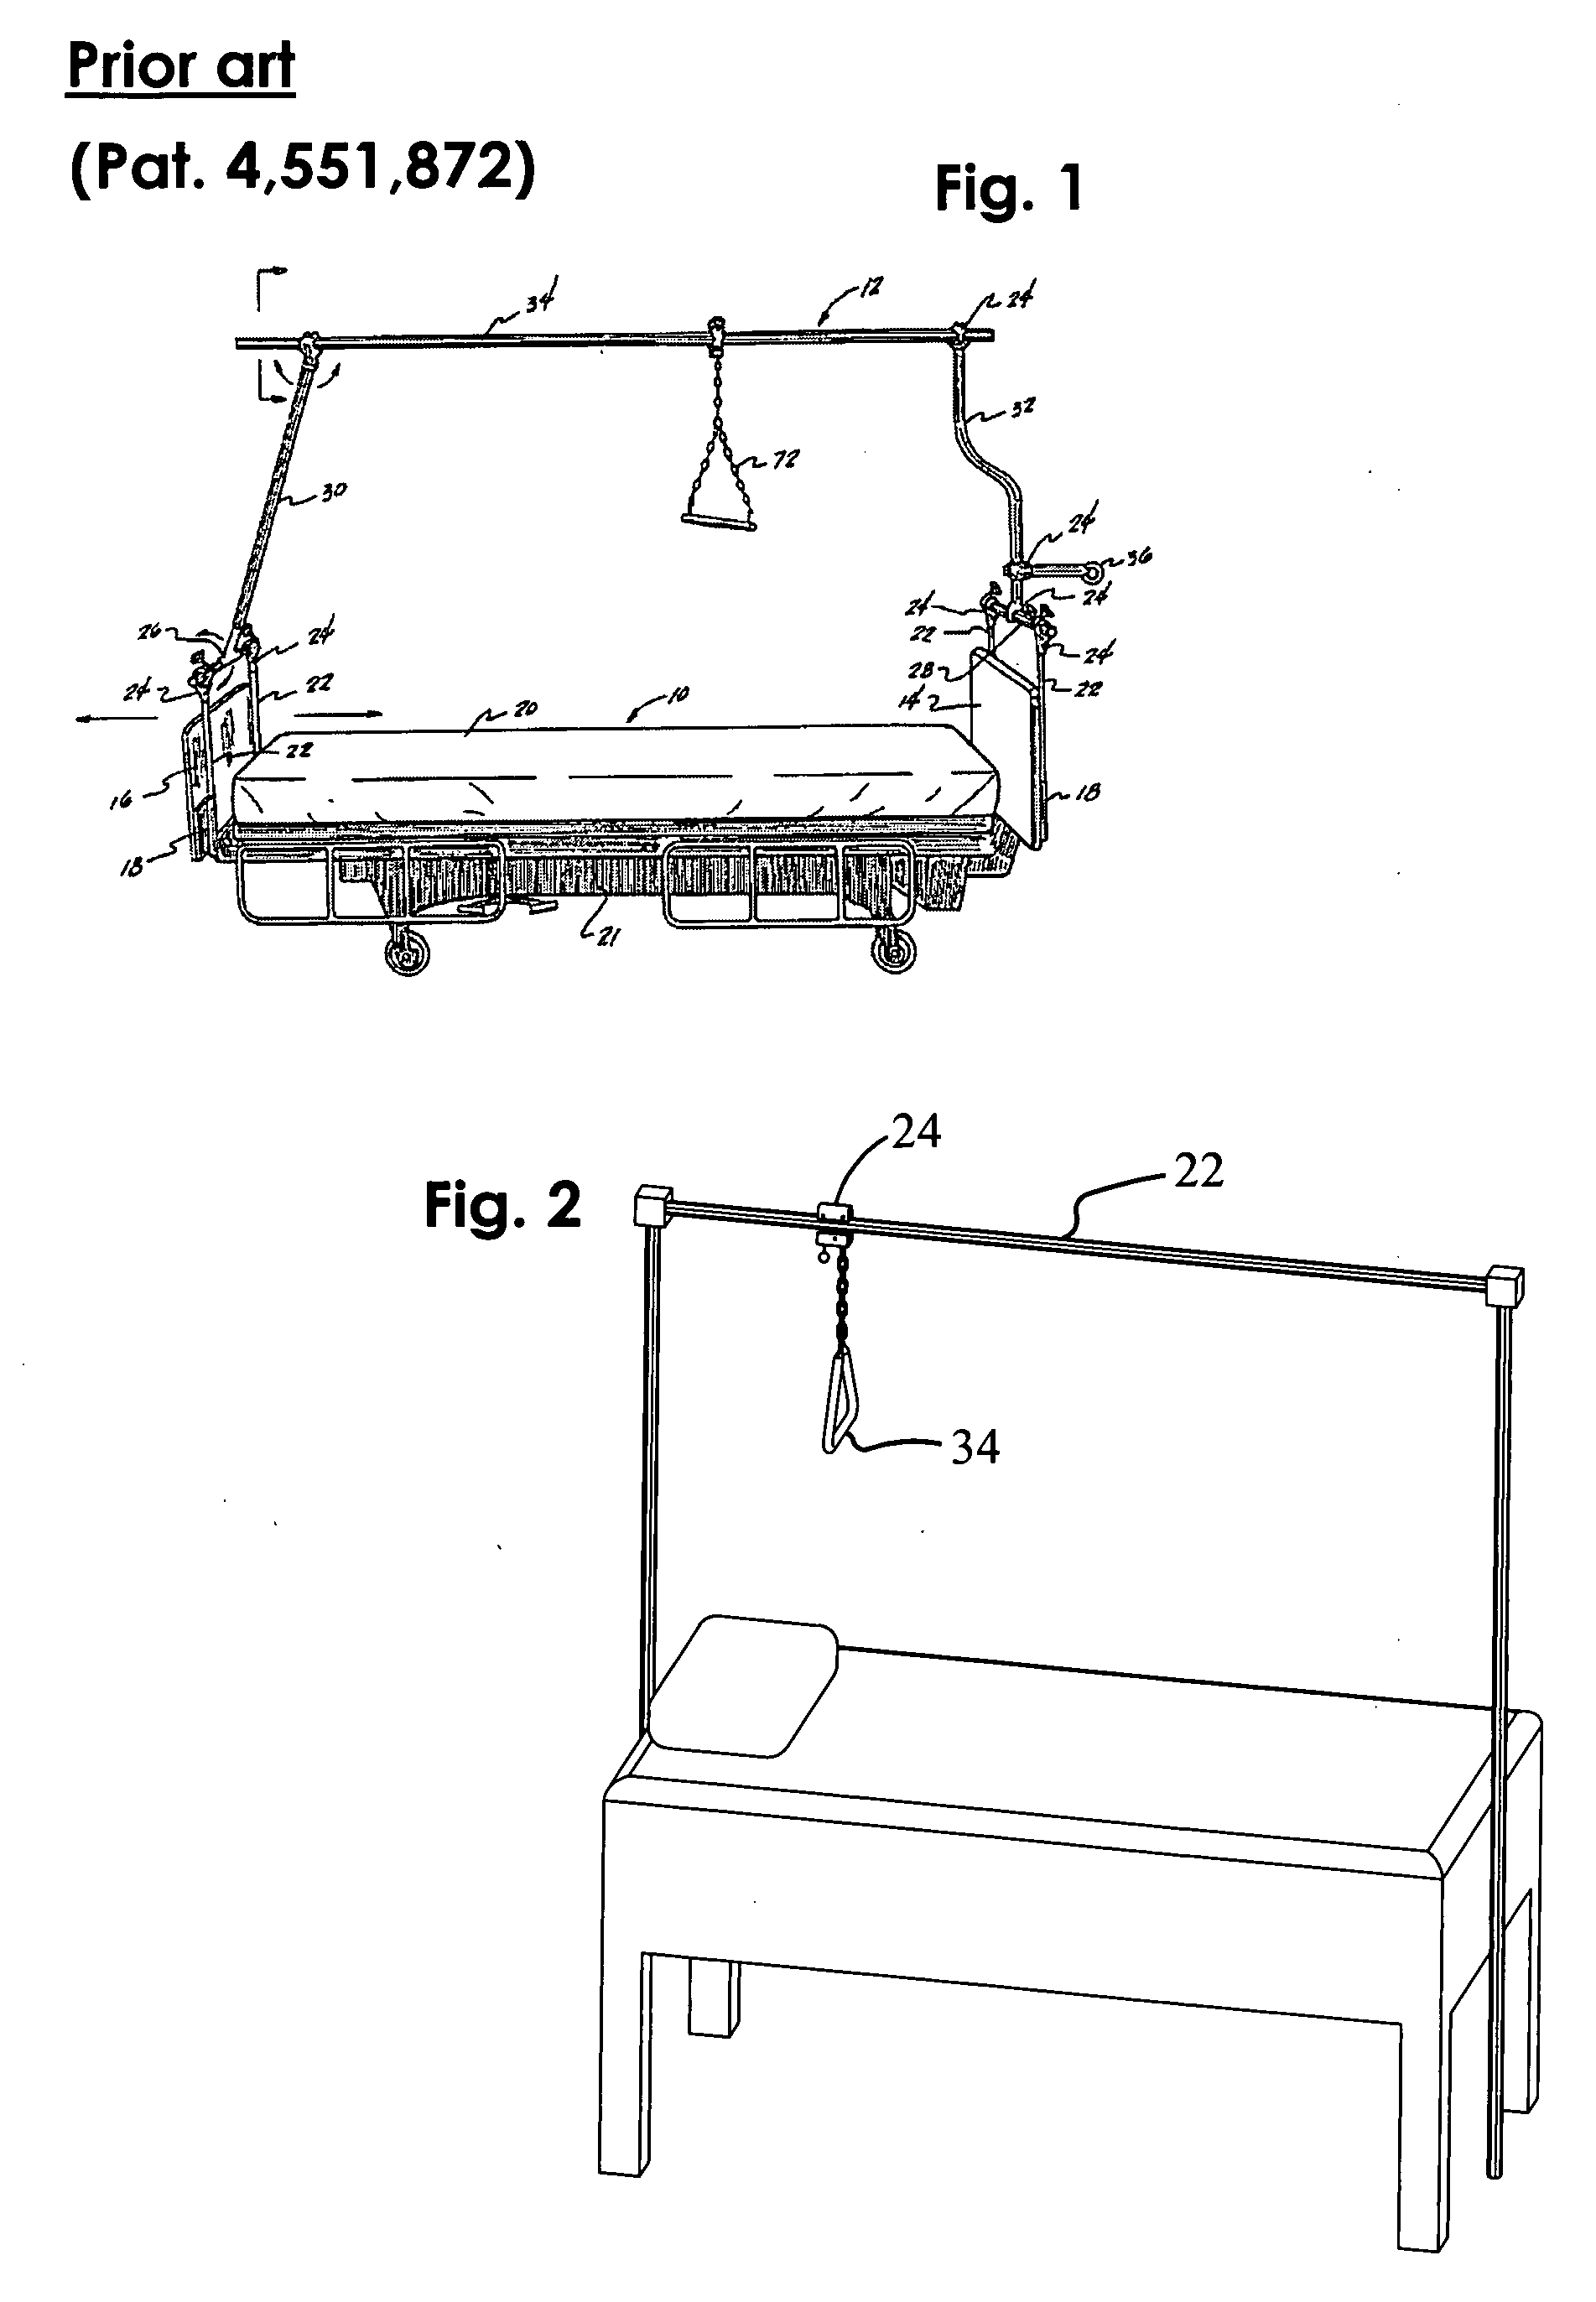 Method and apparatus for use by a patient in temporarily lifting that person with respect to a horizontal surface--such as a bed